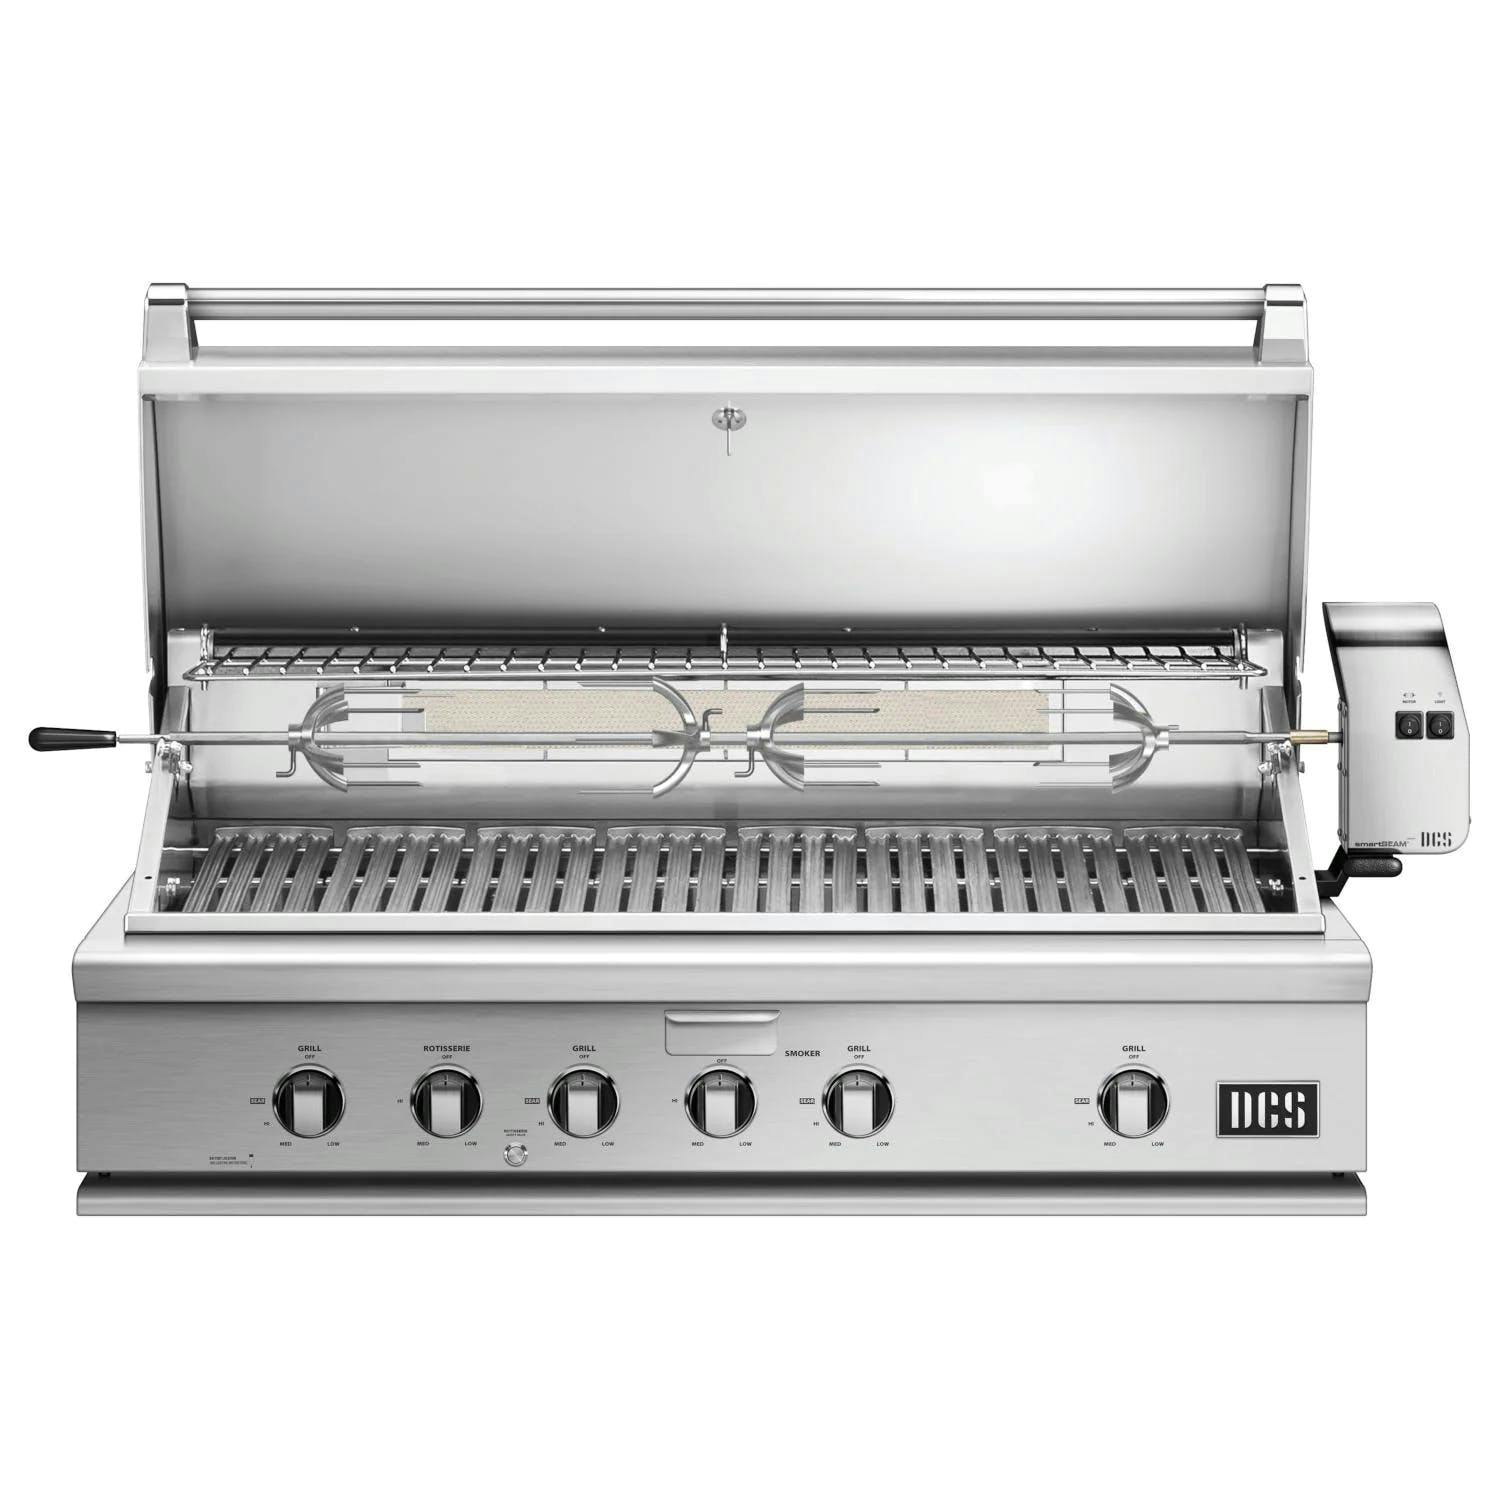 DCS Series 7 Traditional Built-in Gas Grill with Double Side Burner and Rotisserie